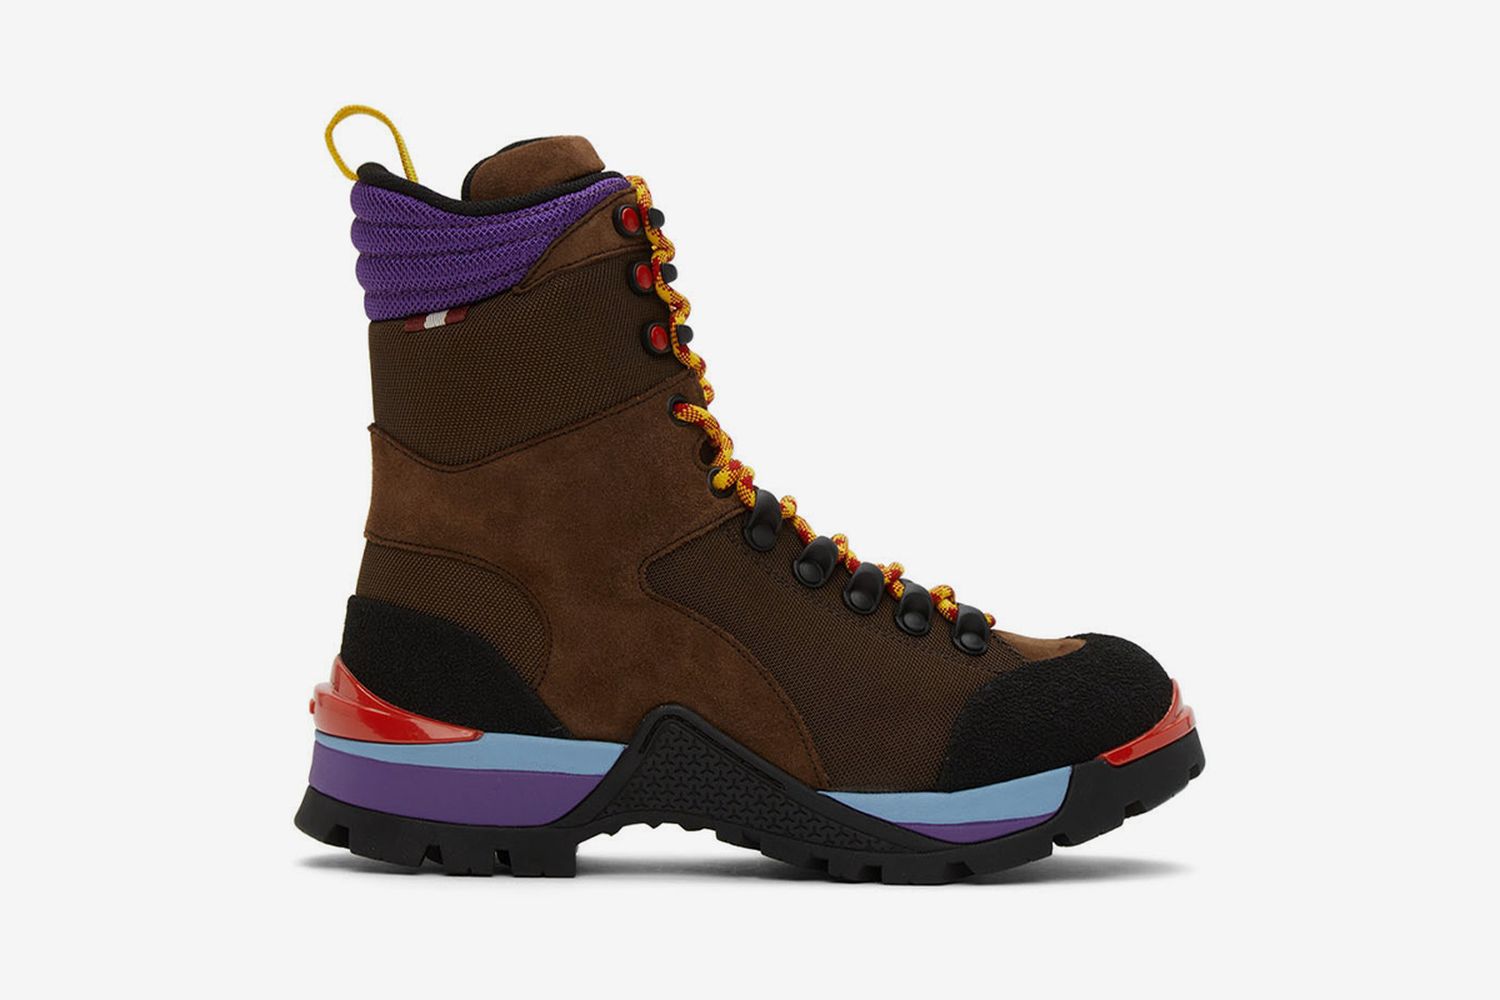 Hike 1 Boots